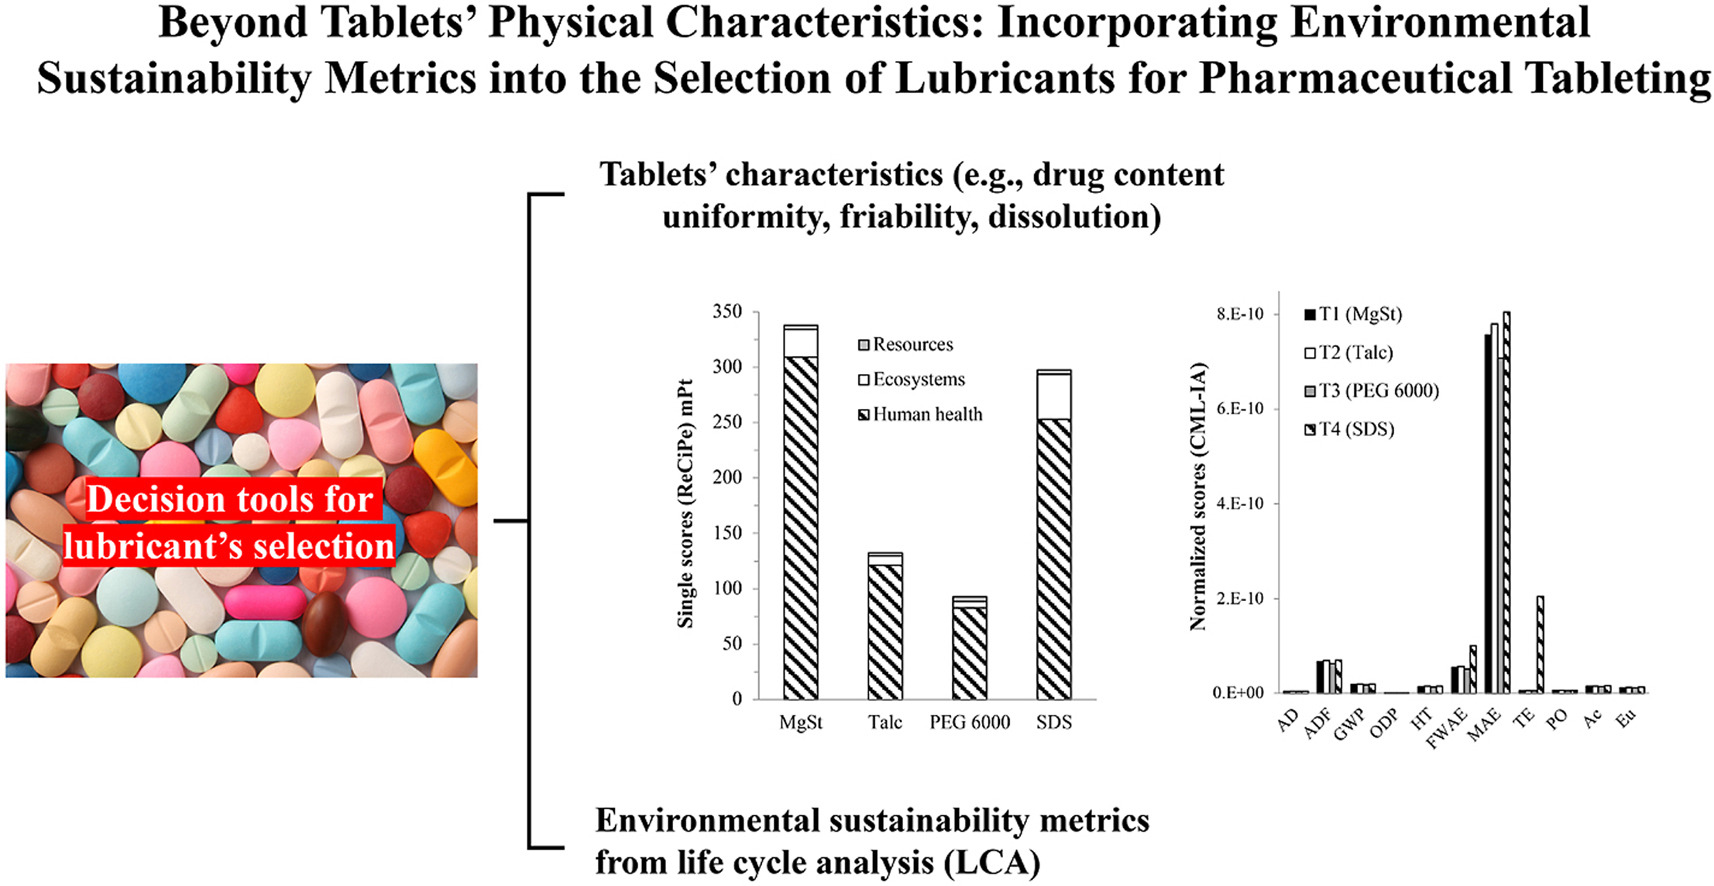 Incorporating environmental sustainability metrics into the selection of lubricants for pharmaceutical tableting